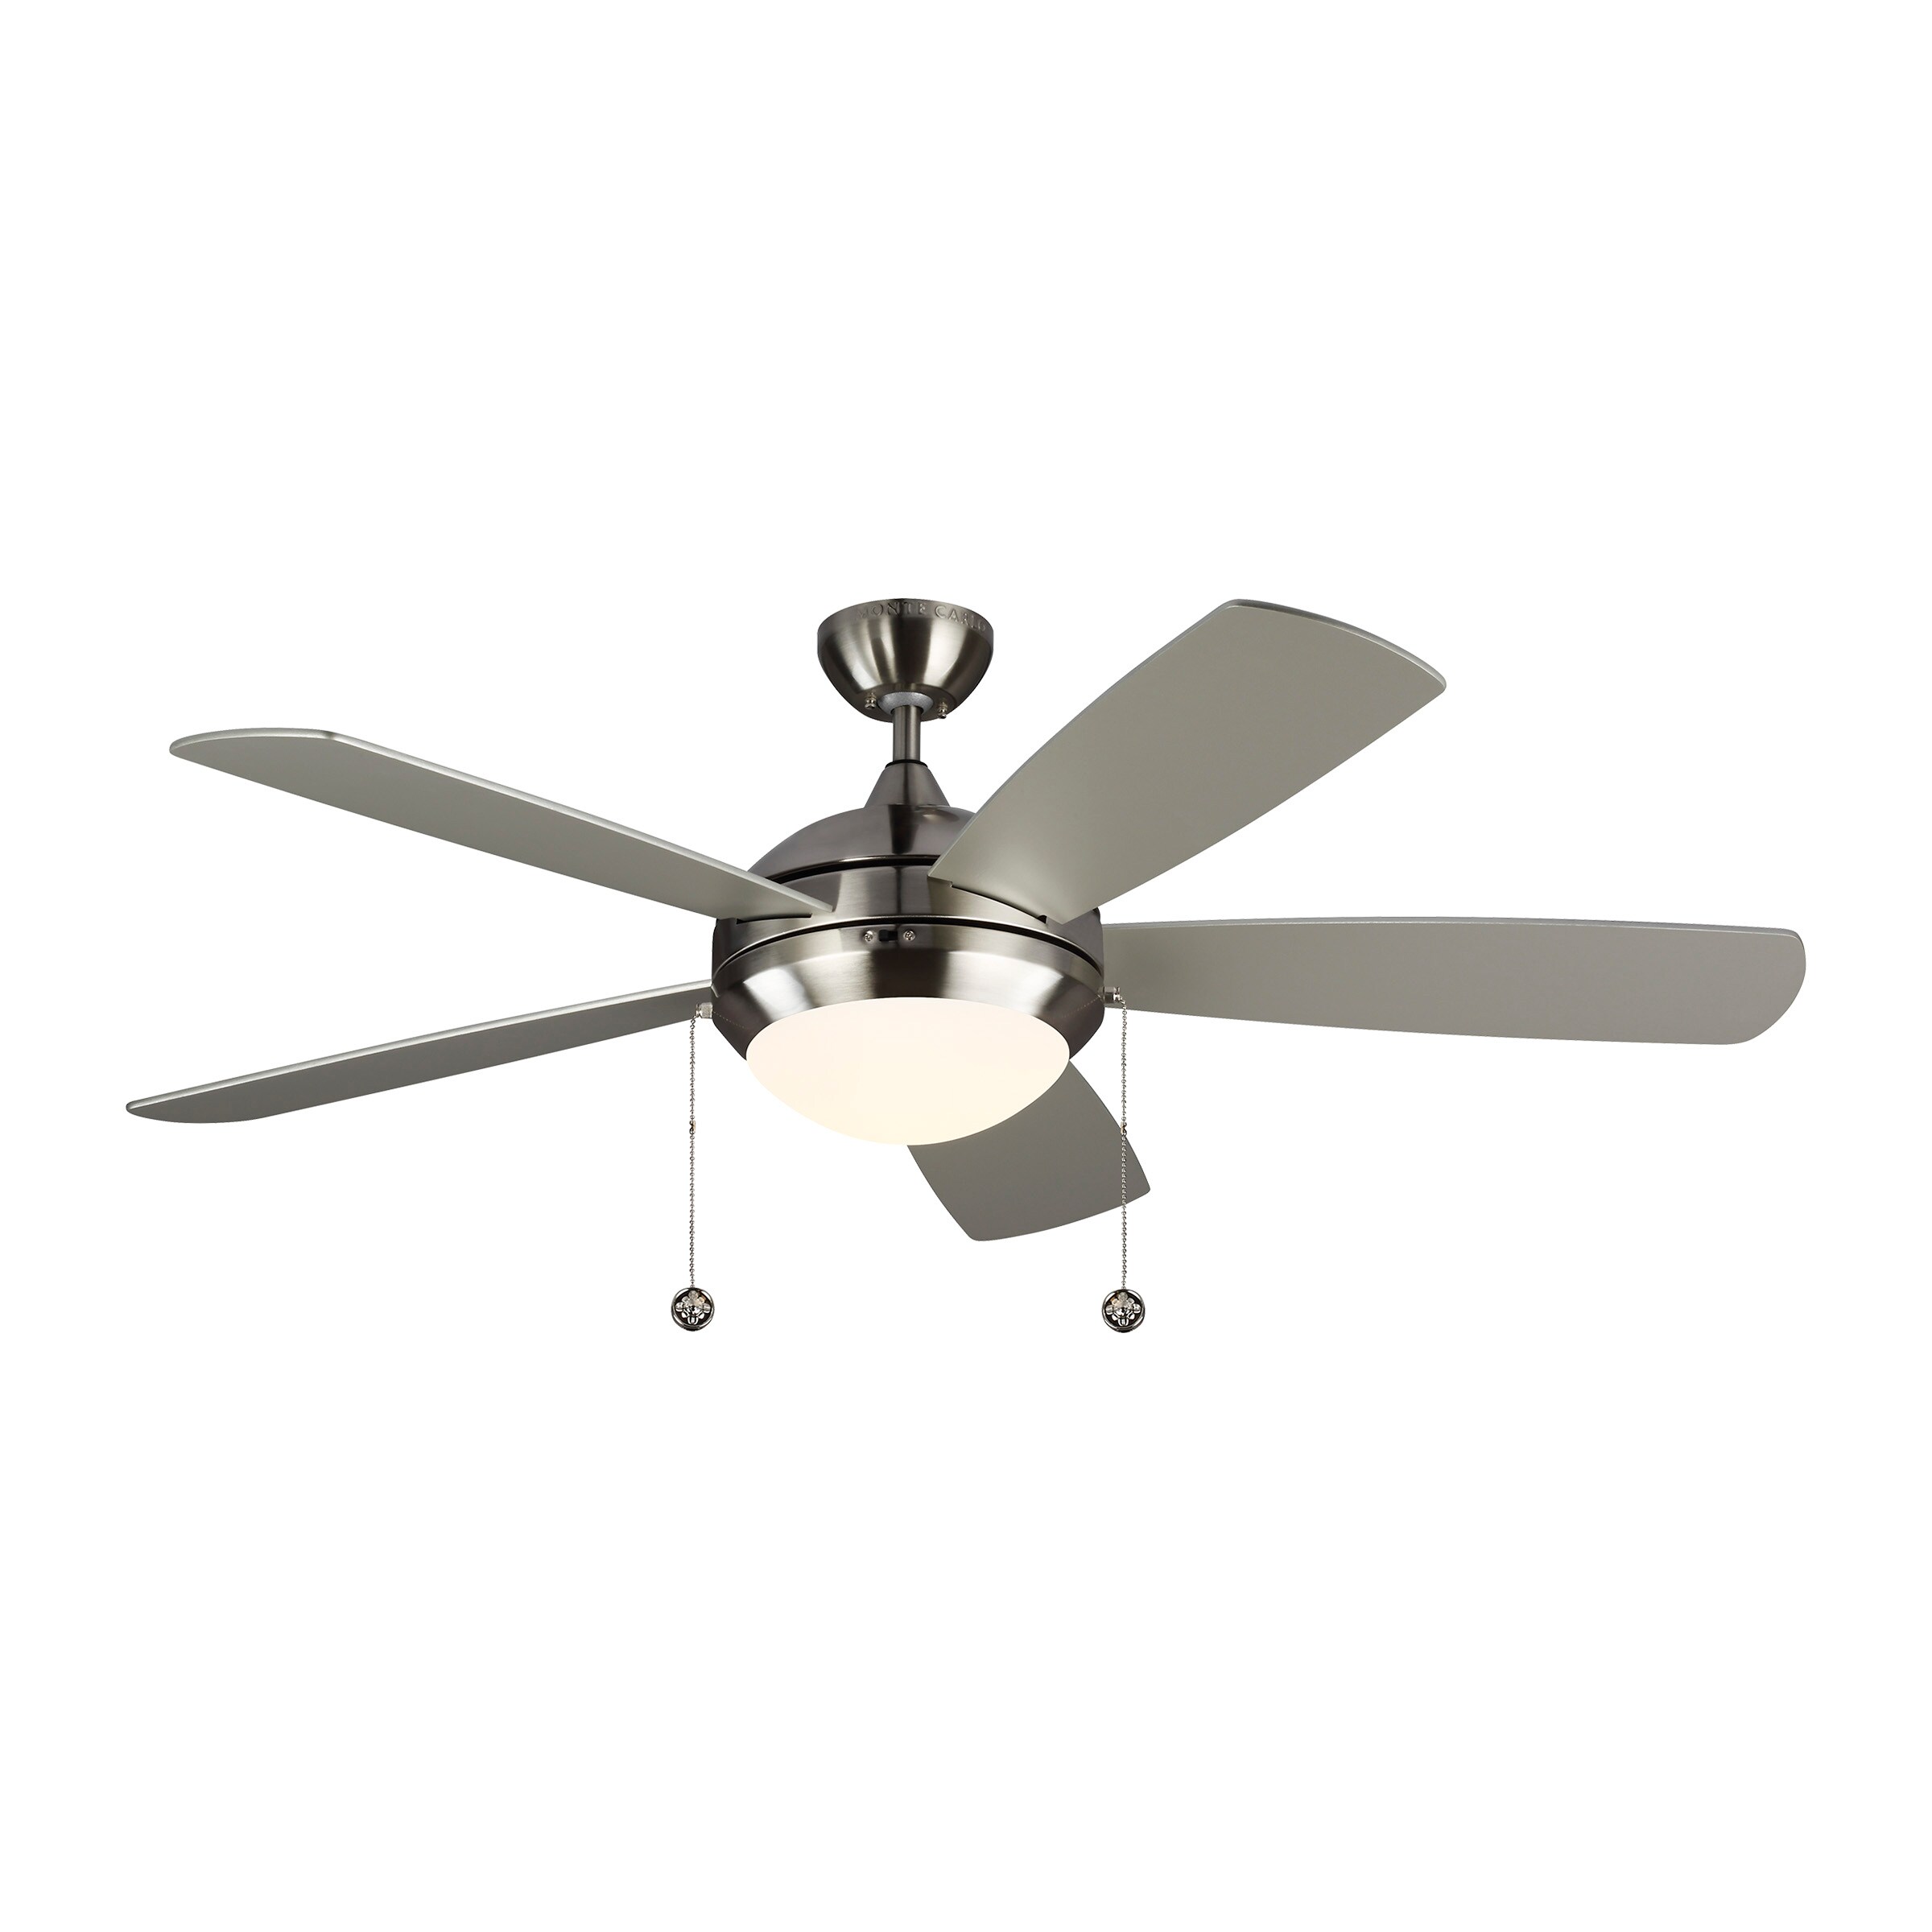 Brushed Steel Monte Carlo 5DI52BSD-L 52" Fan 5 Blades Light and Pull Chain 